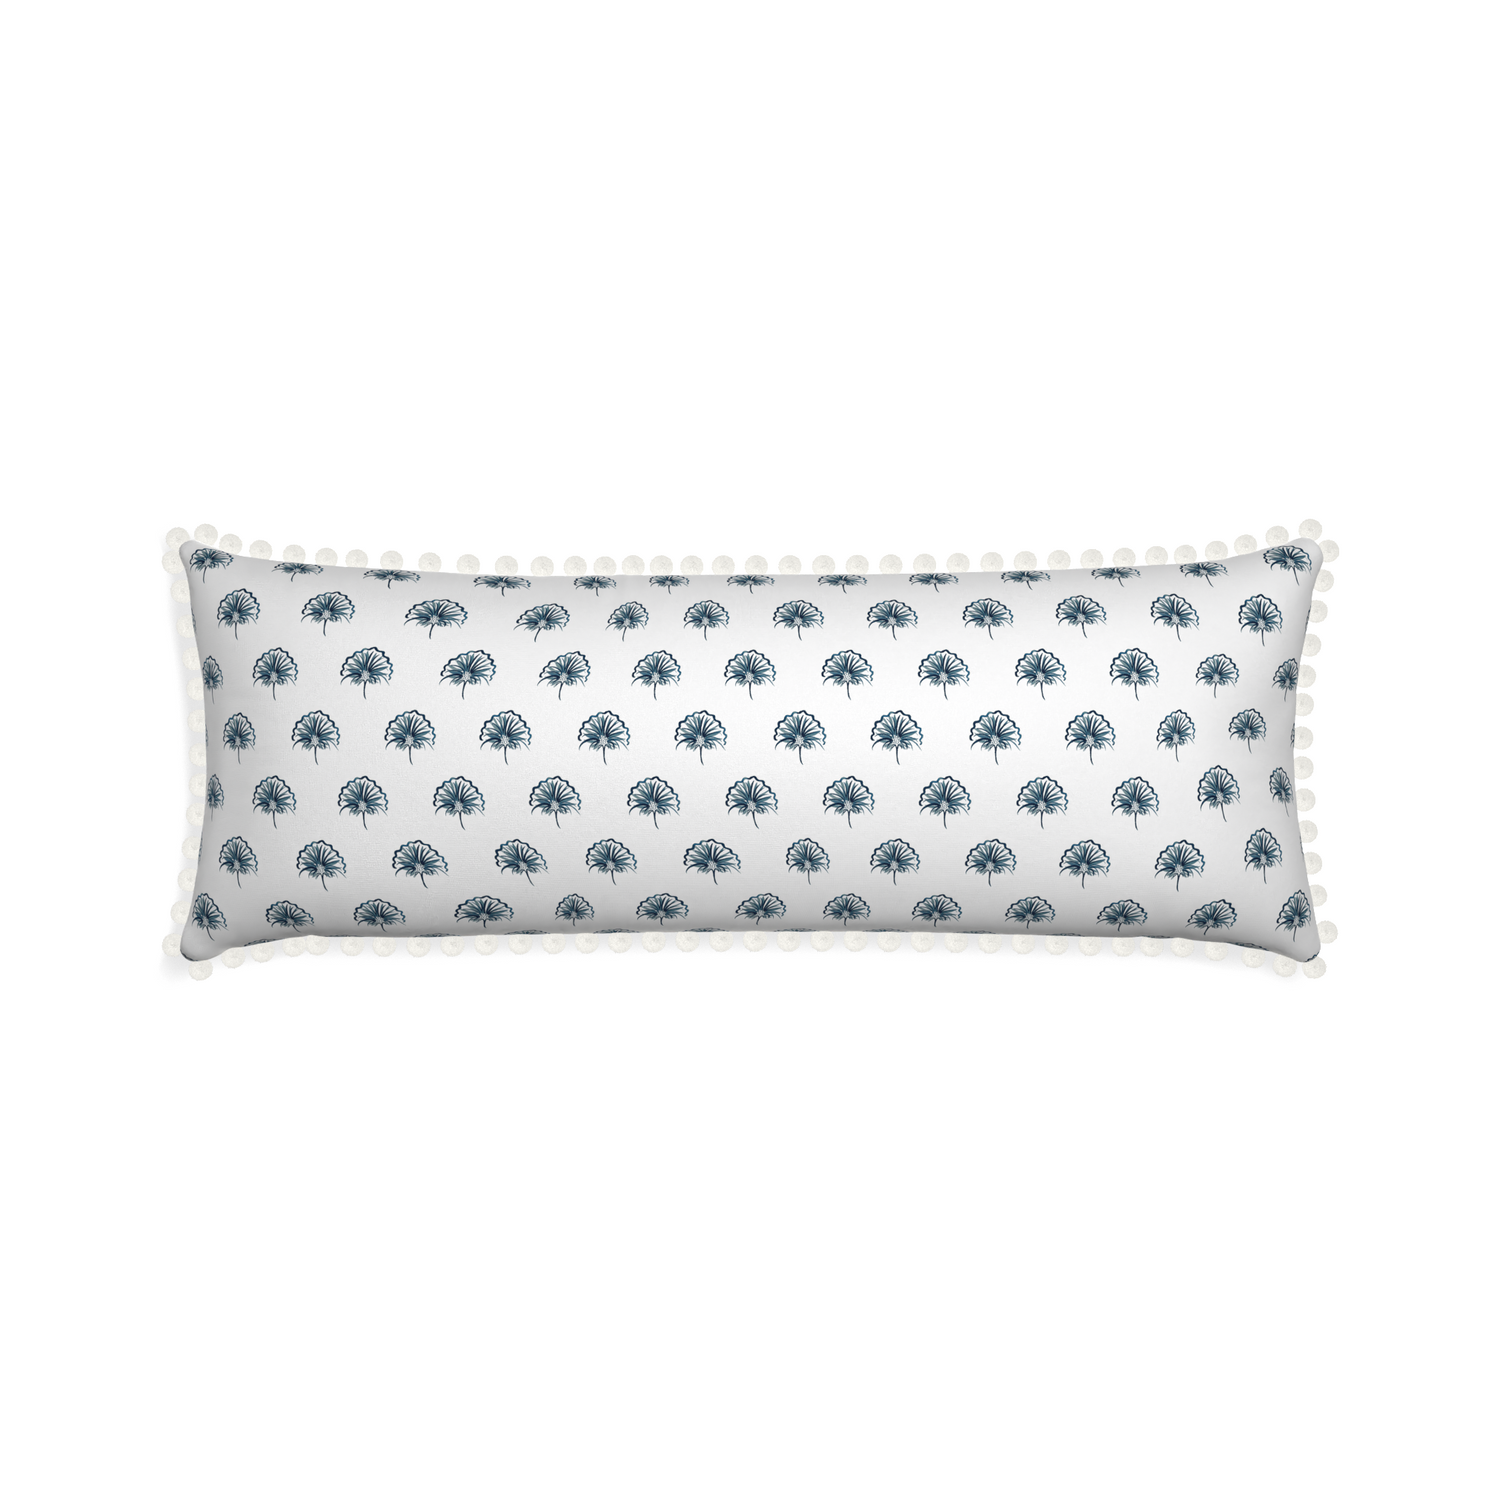 Xl-lumbar penelope midnight custom floral navypillow with snow pom pom on white background